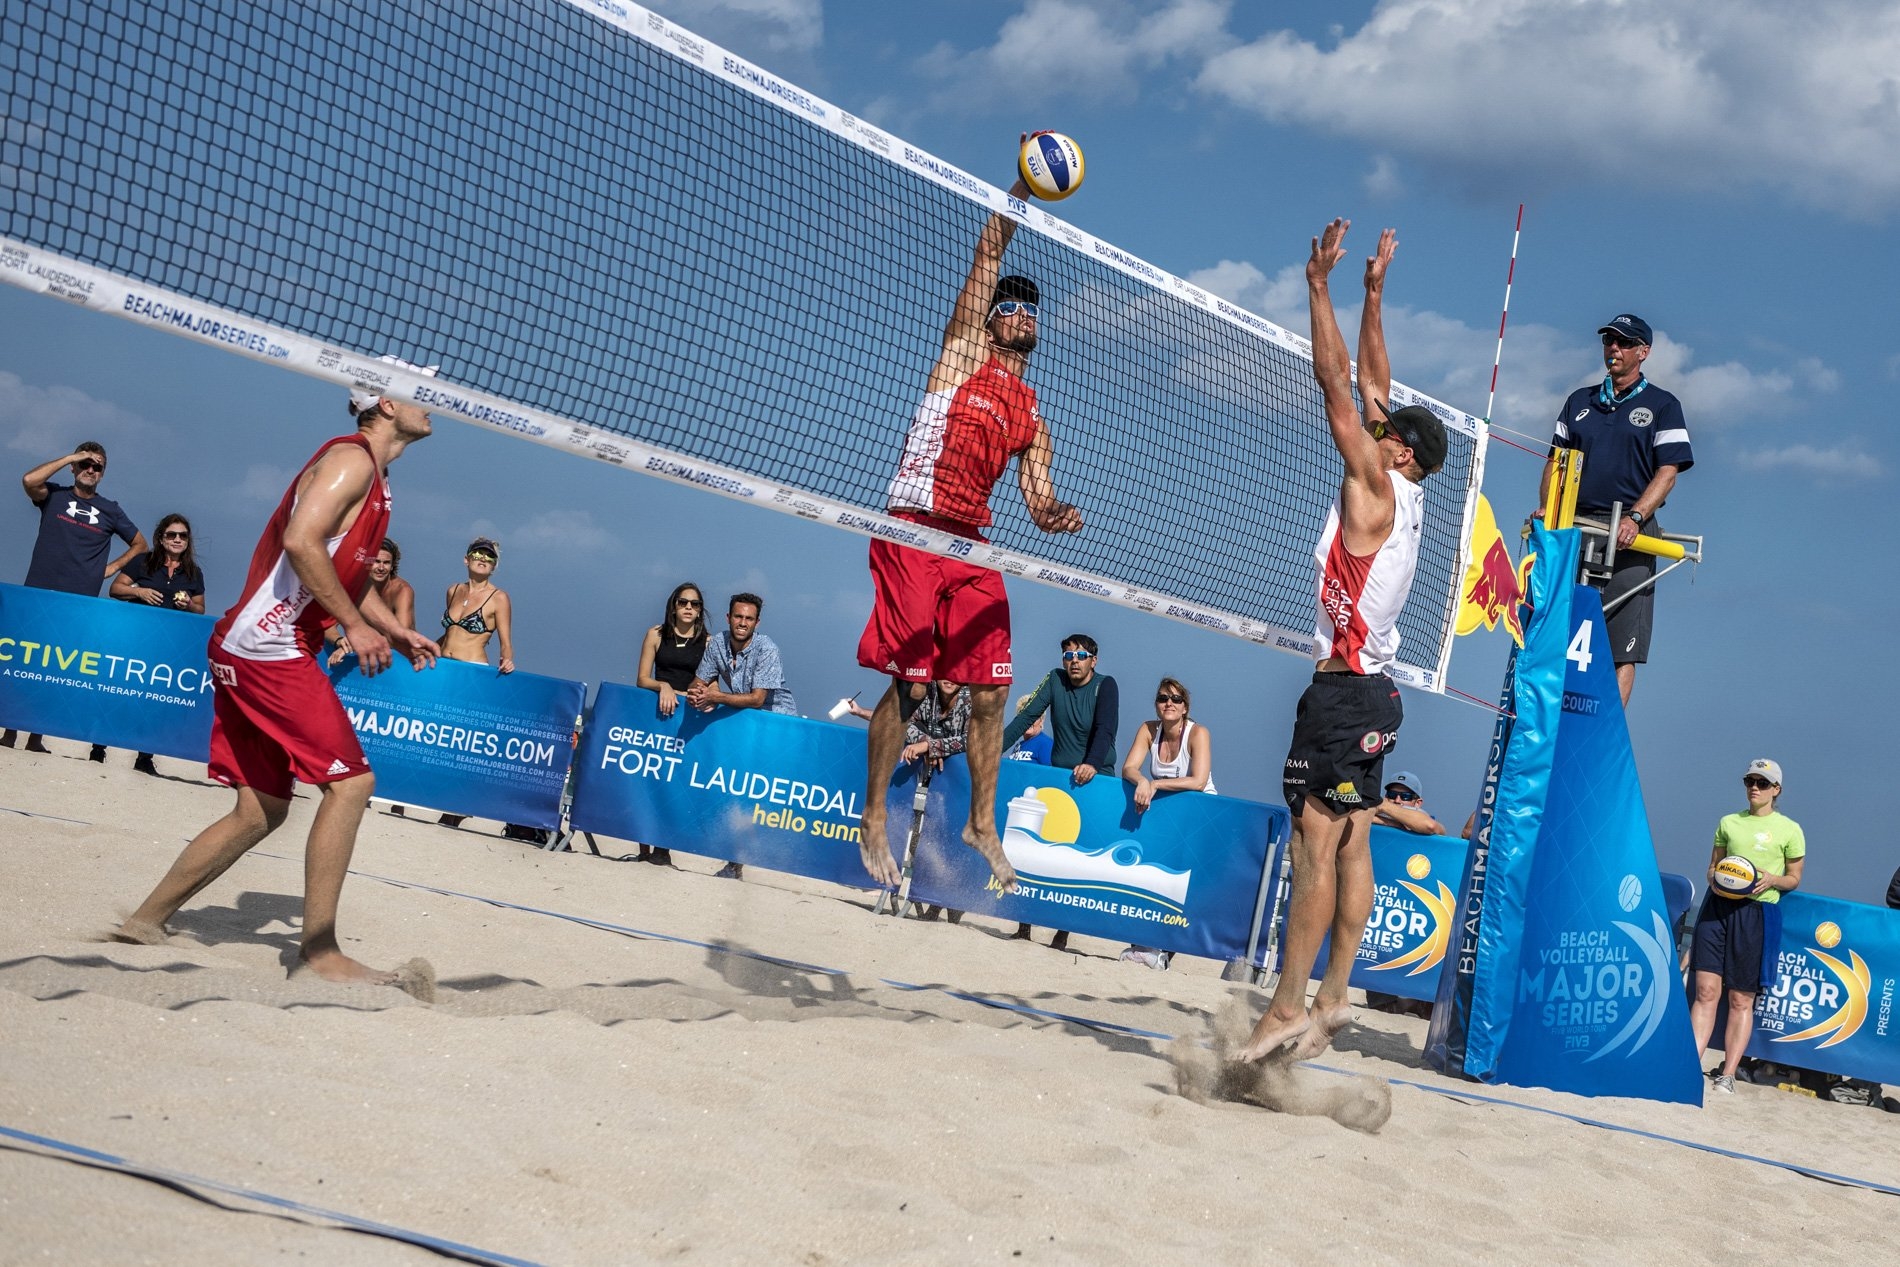 Losiak and Kantor will now face another Latvian team in Samoilovs and Smedins (Photocredit: FIVB)